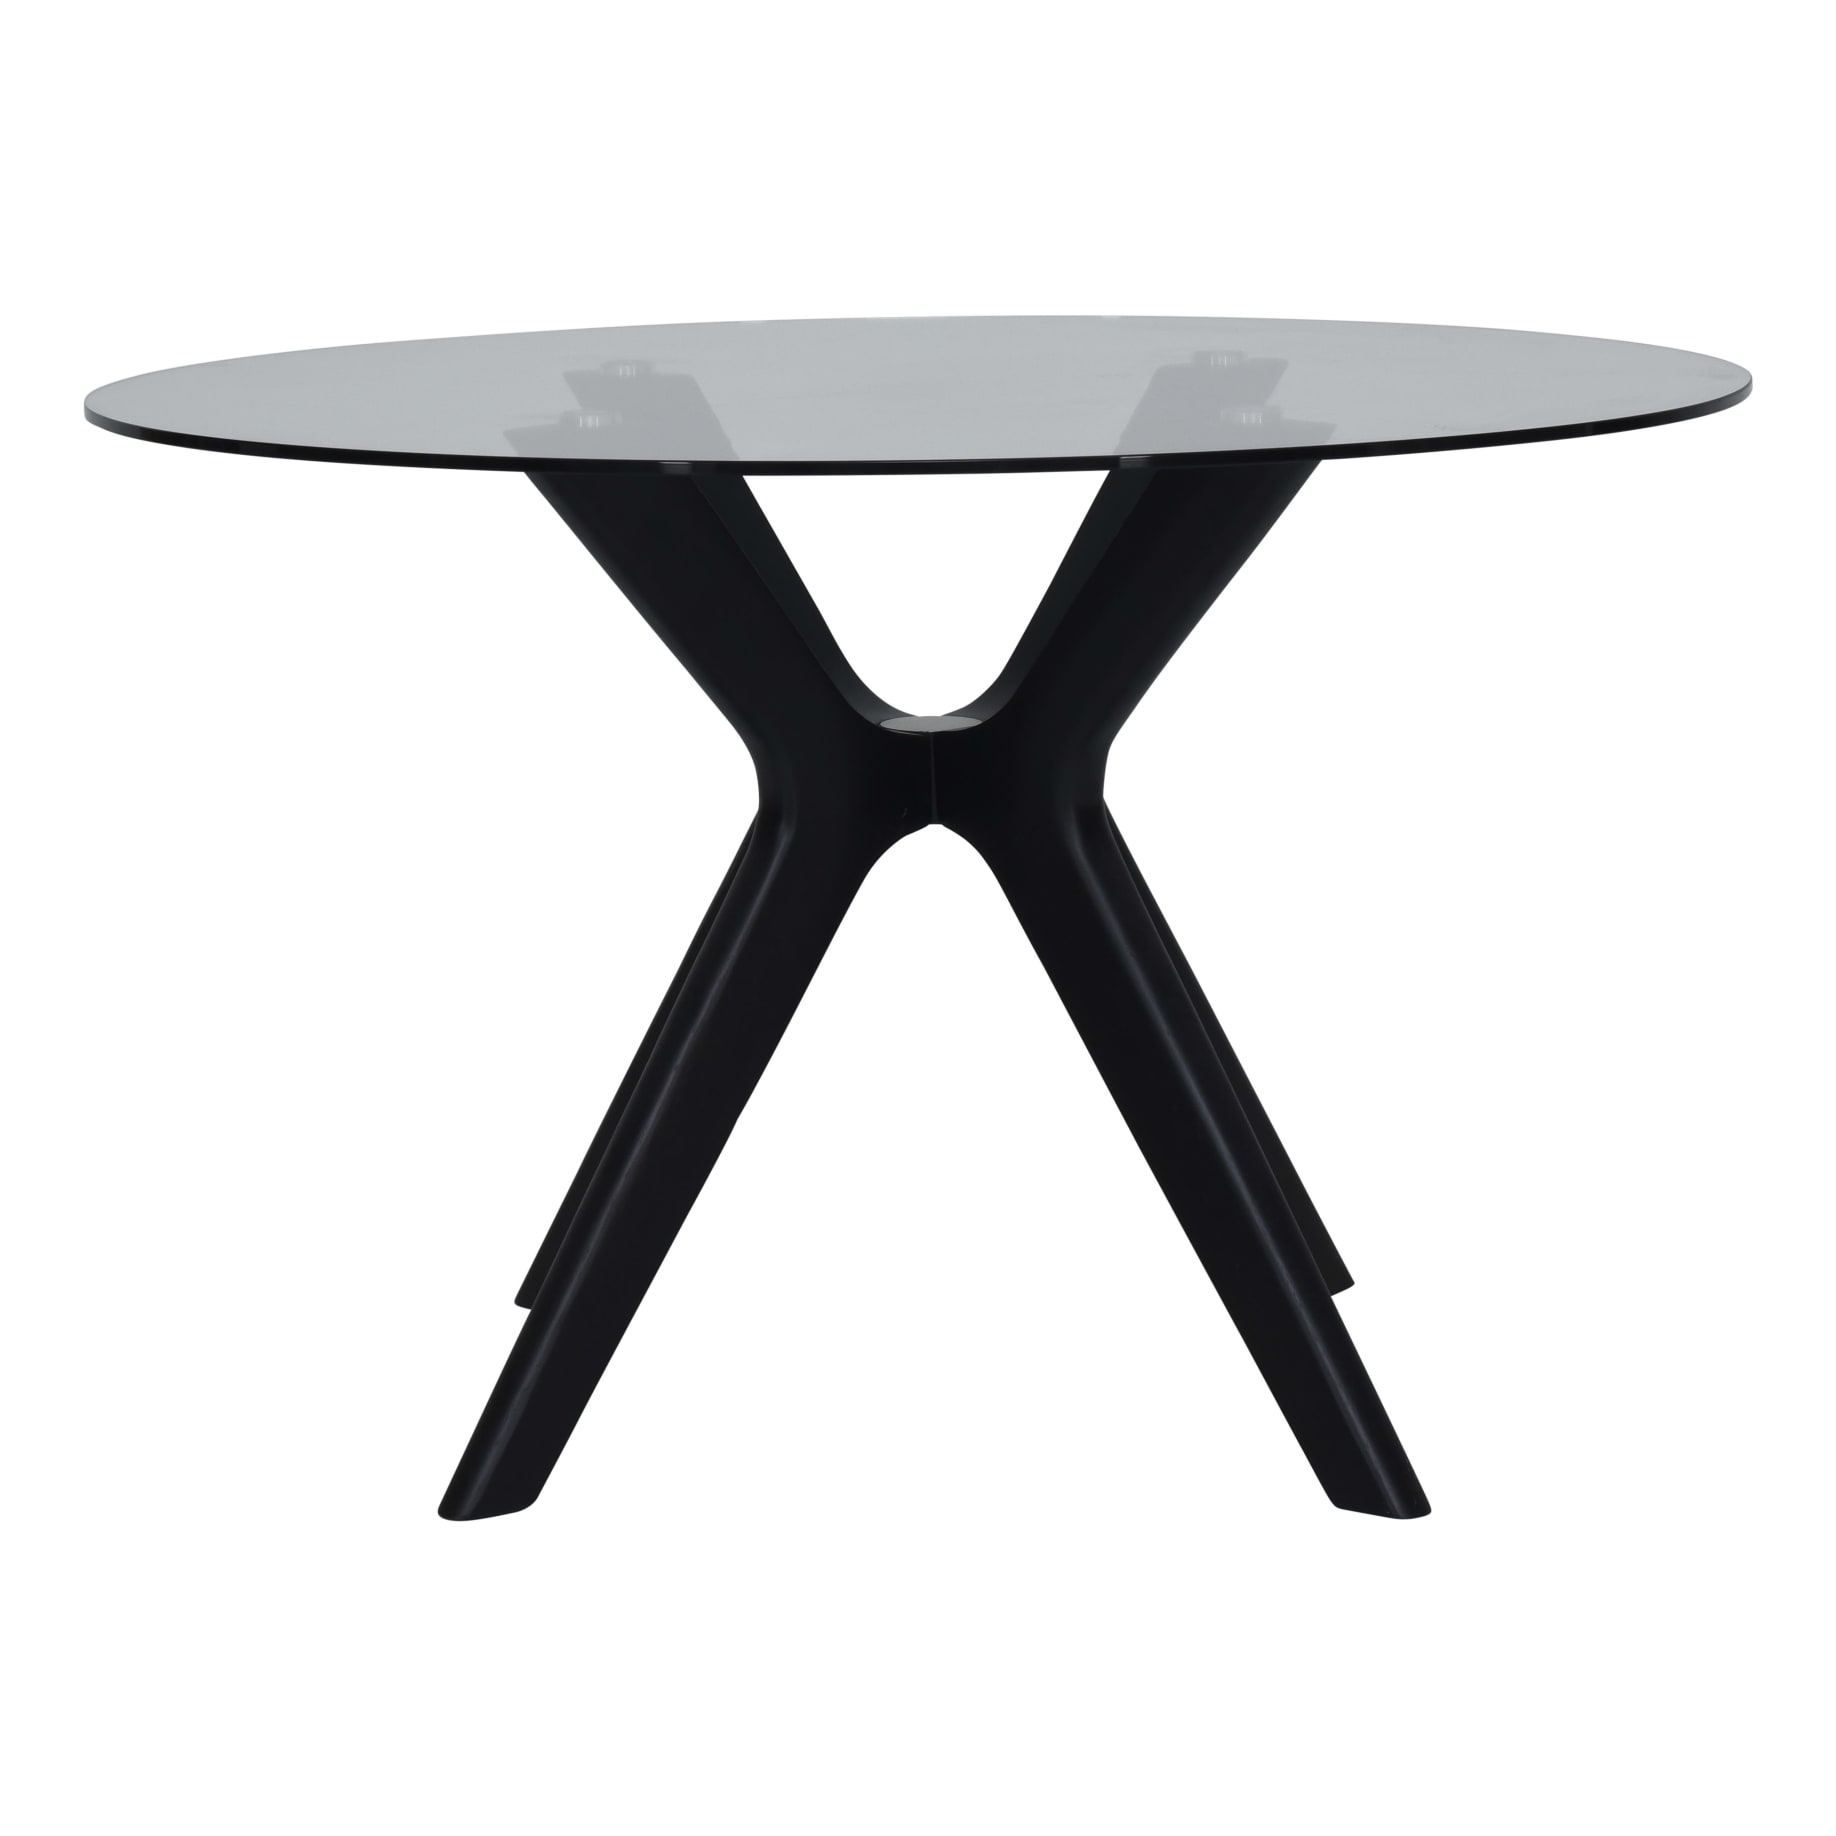 Padma Round Dining Table 120cm in Glass / Black